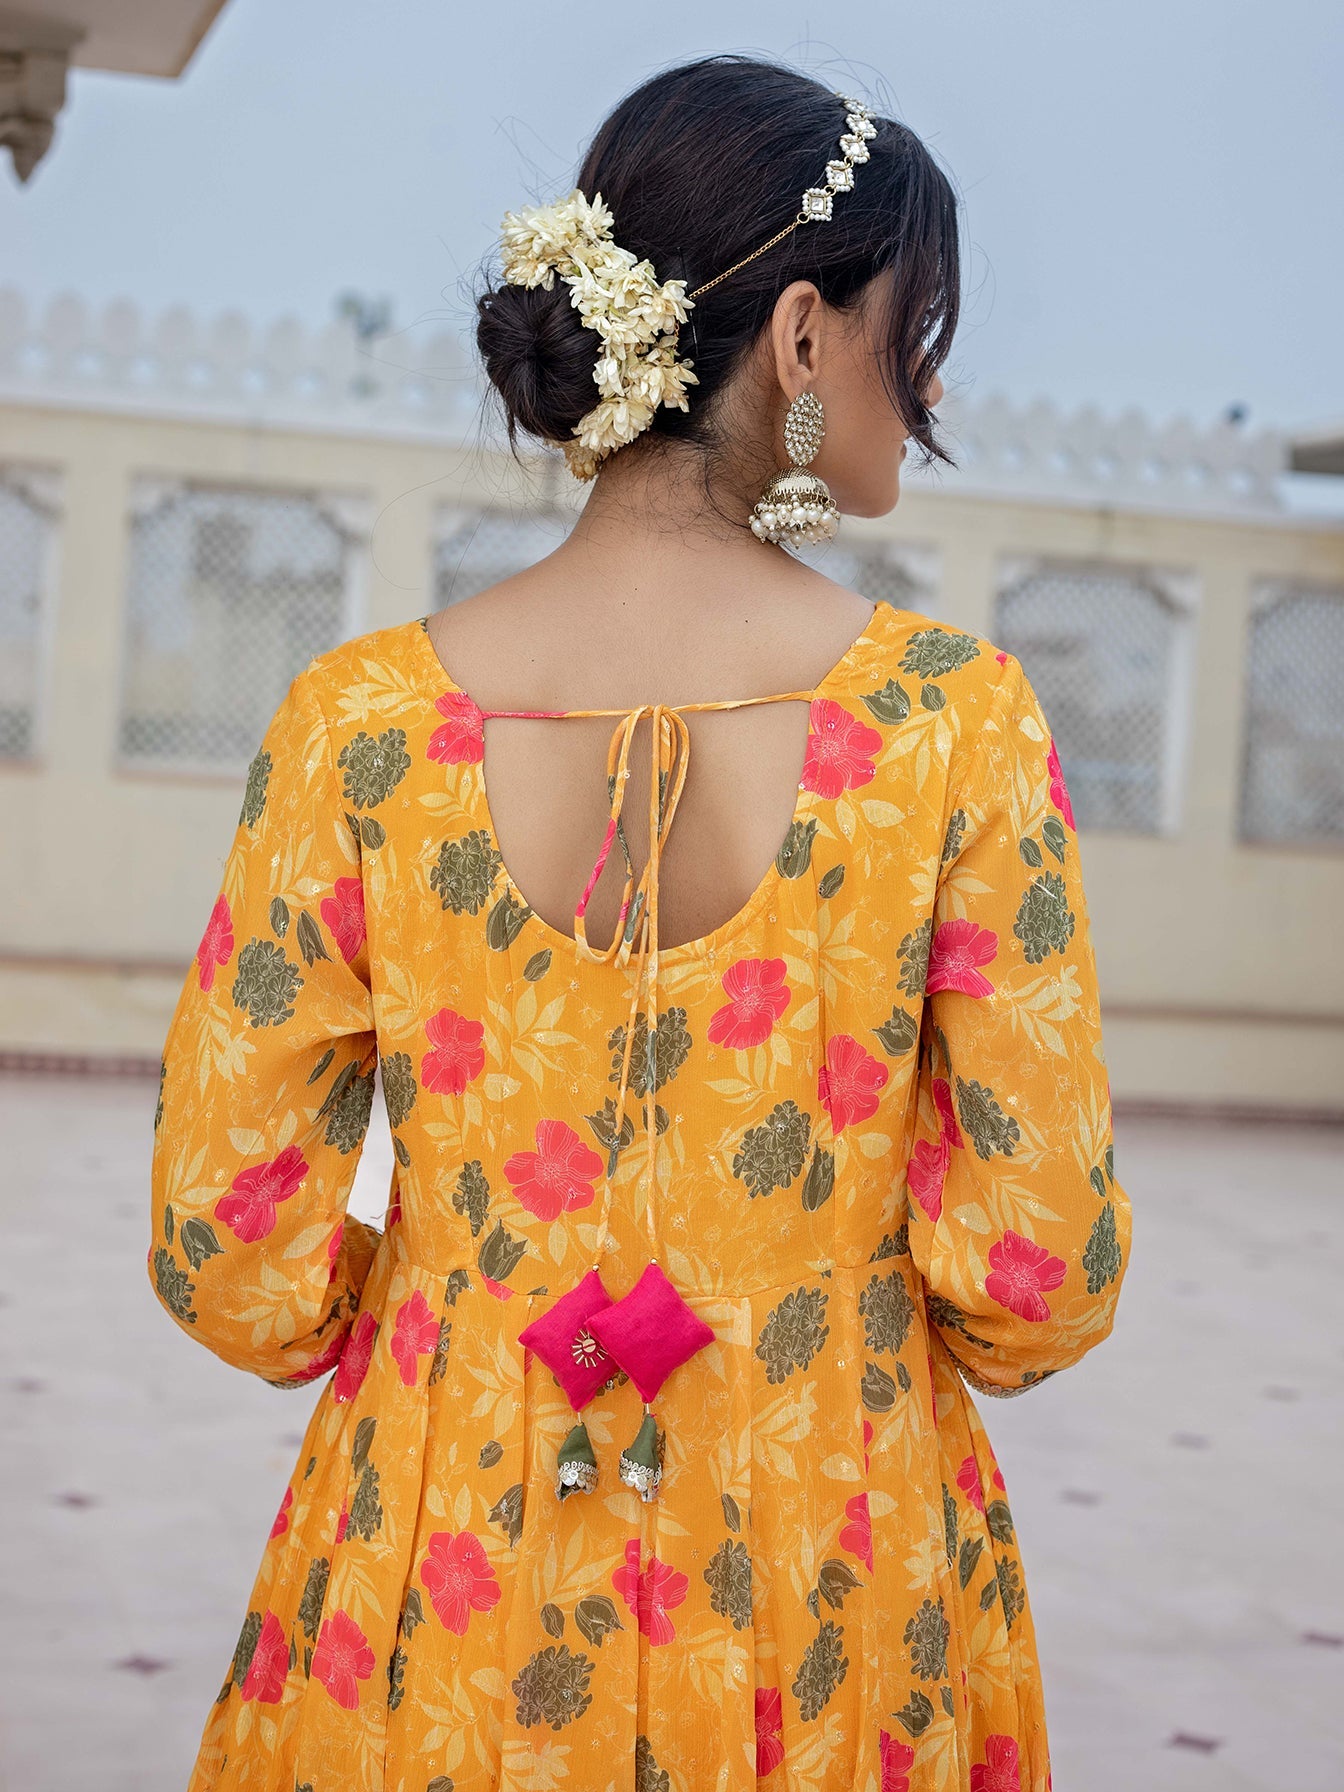 elegance-meets-vibrance-in-our-mustard-yellow-floral-jaal-printed-anarkali-set-a-fusion-of-tradition-and-style-perfect-for-a-timeless-statement